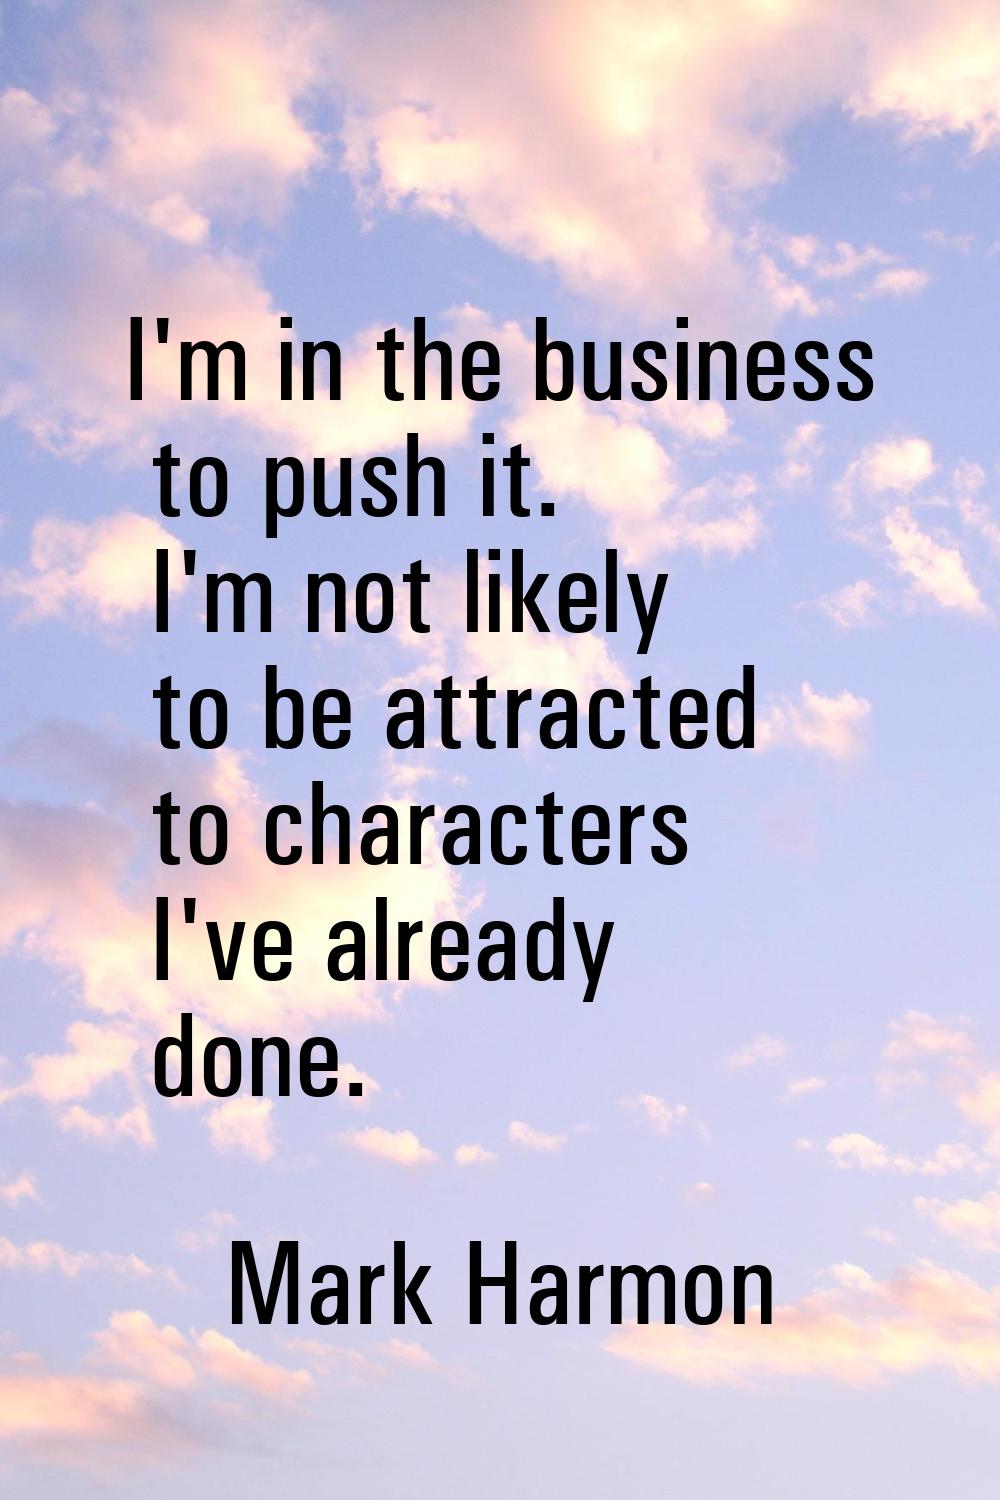 I'm in the business to push it. I'm not likely to be attracted to characters I've already done.